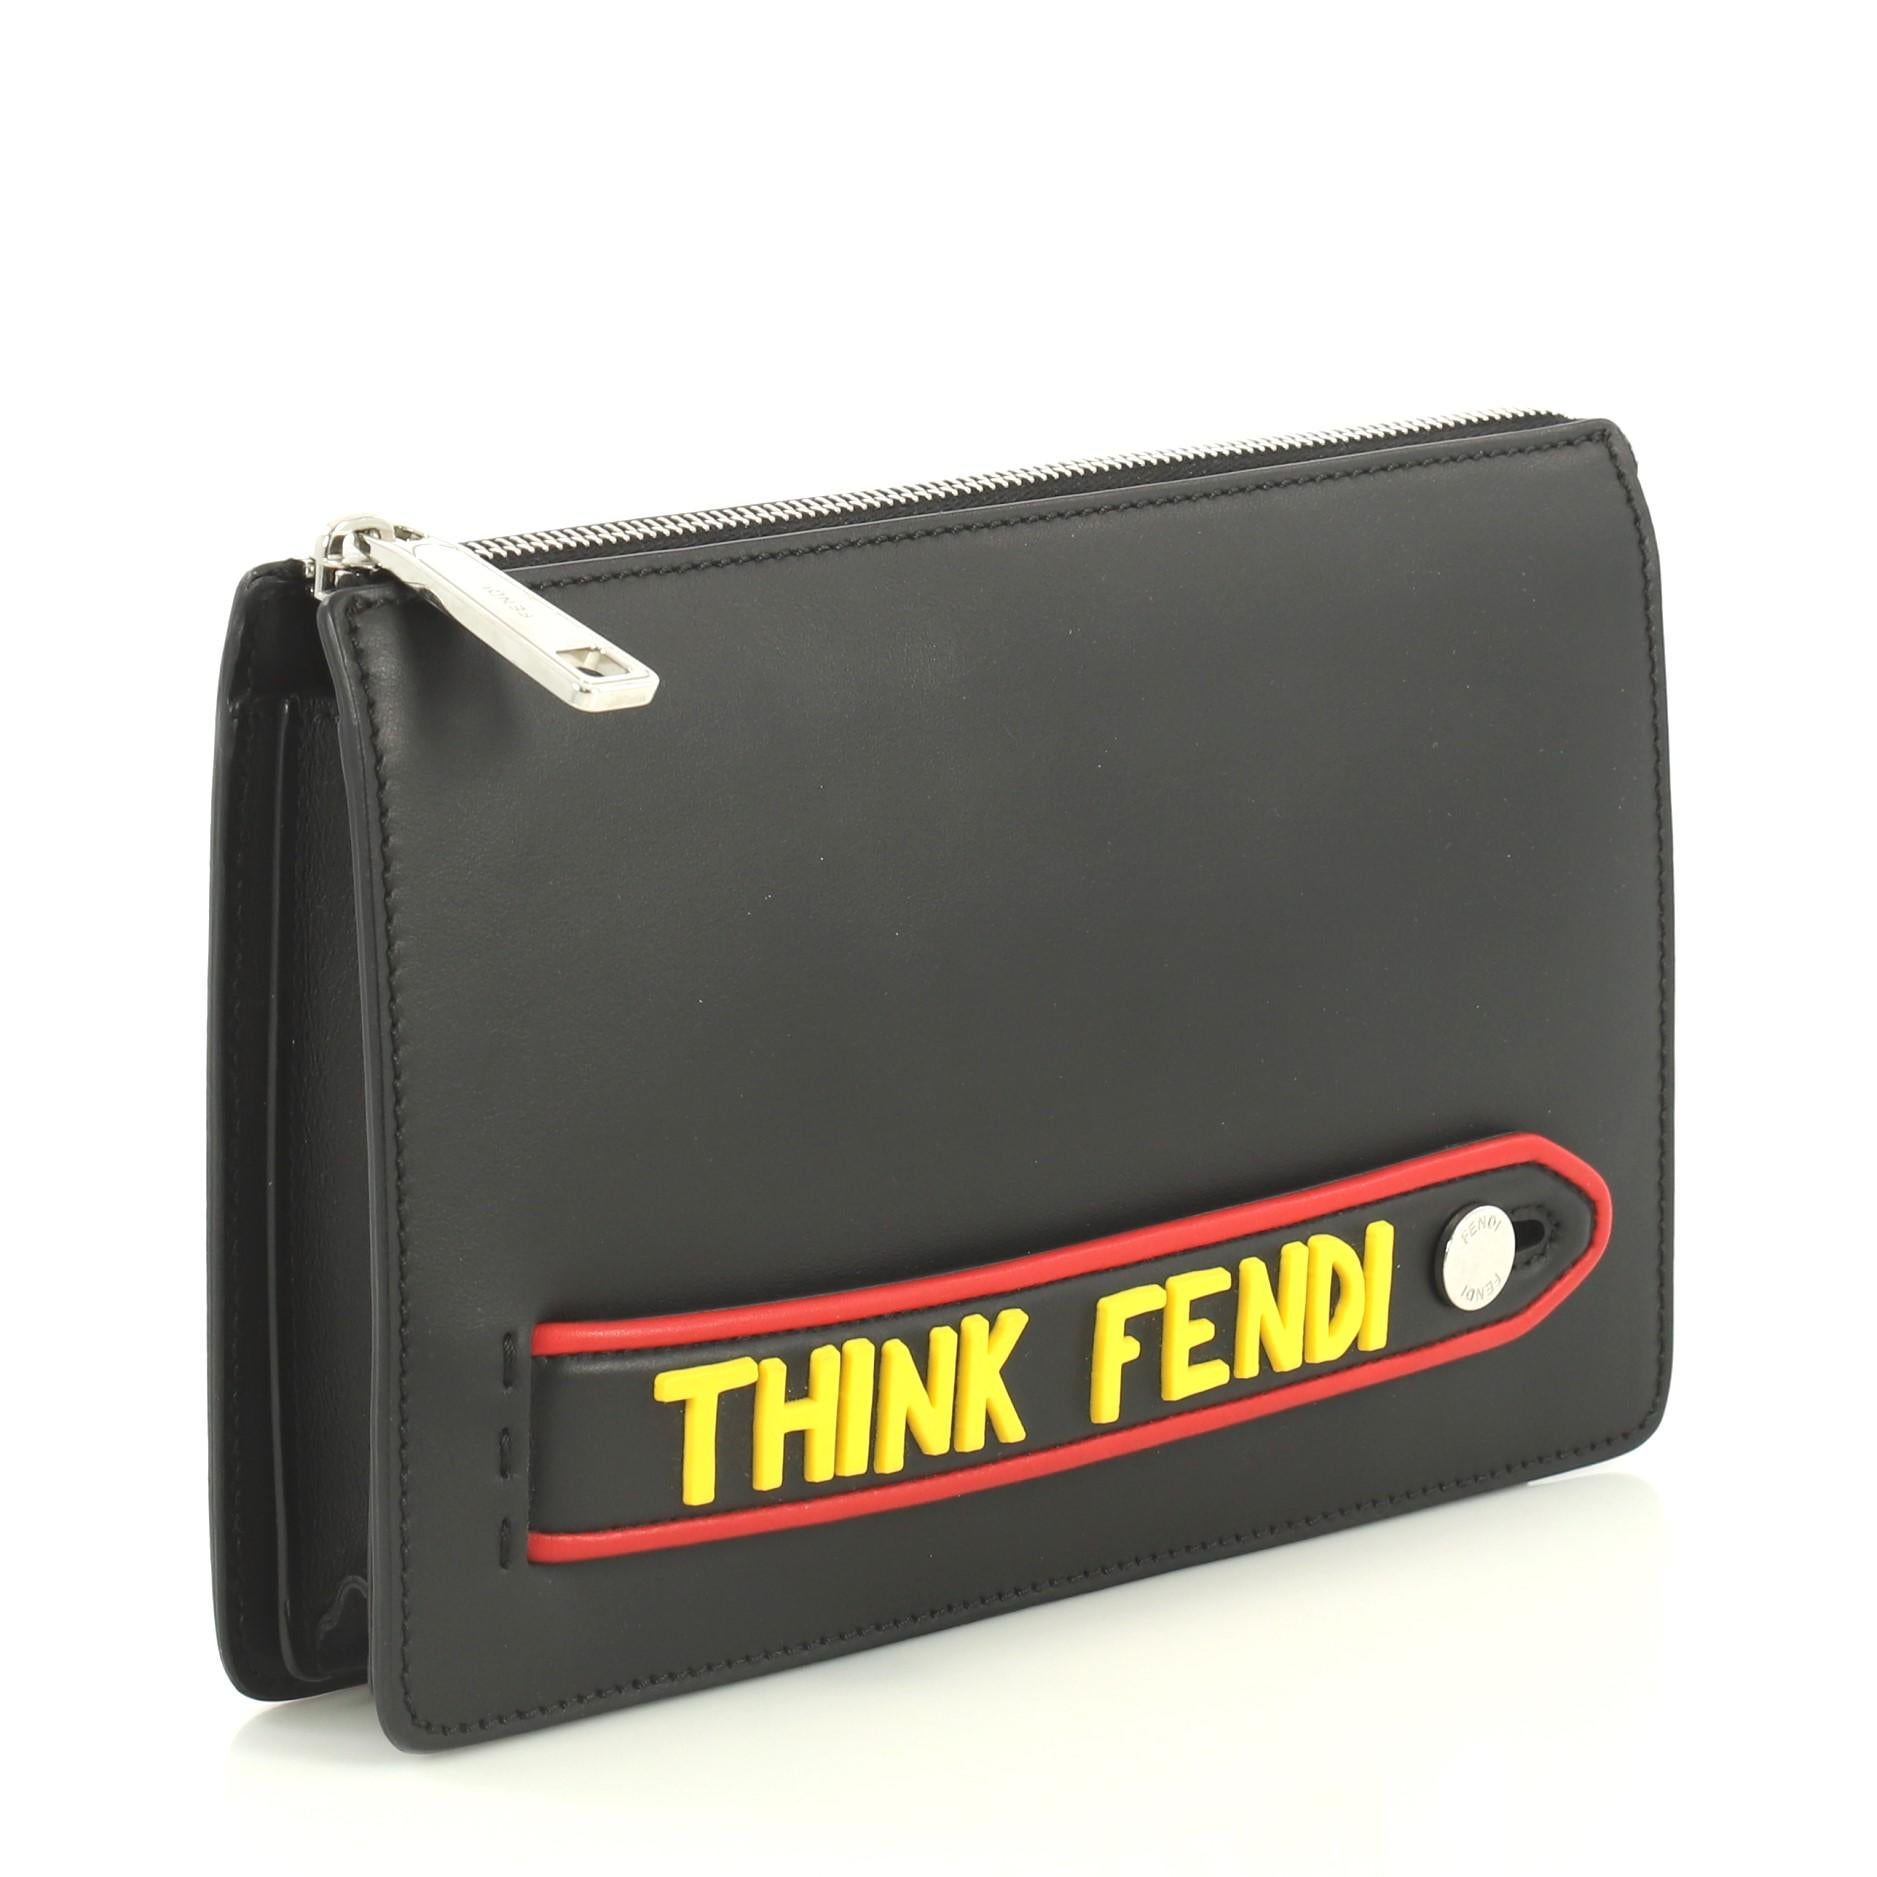 Black Fendi Vocabulary Pouch Inlaid Leather Small